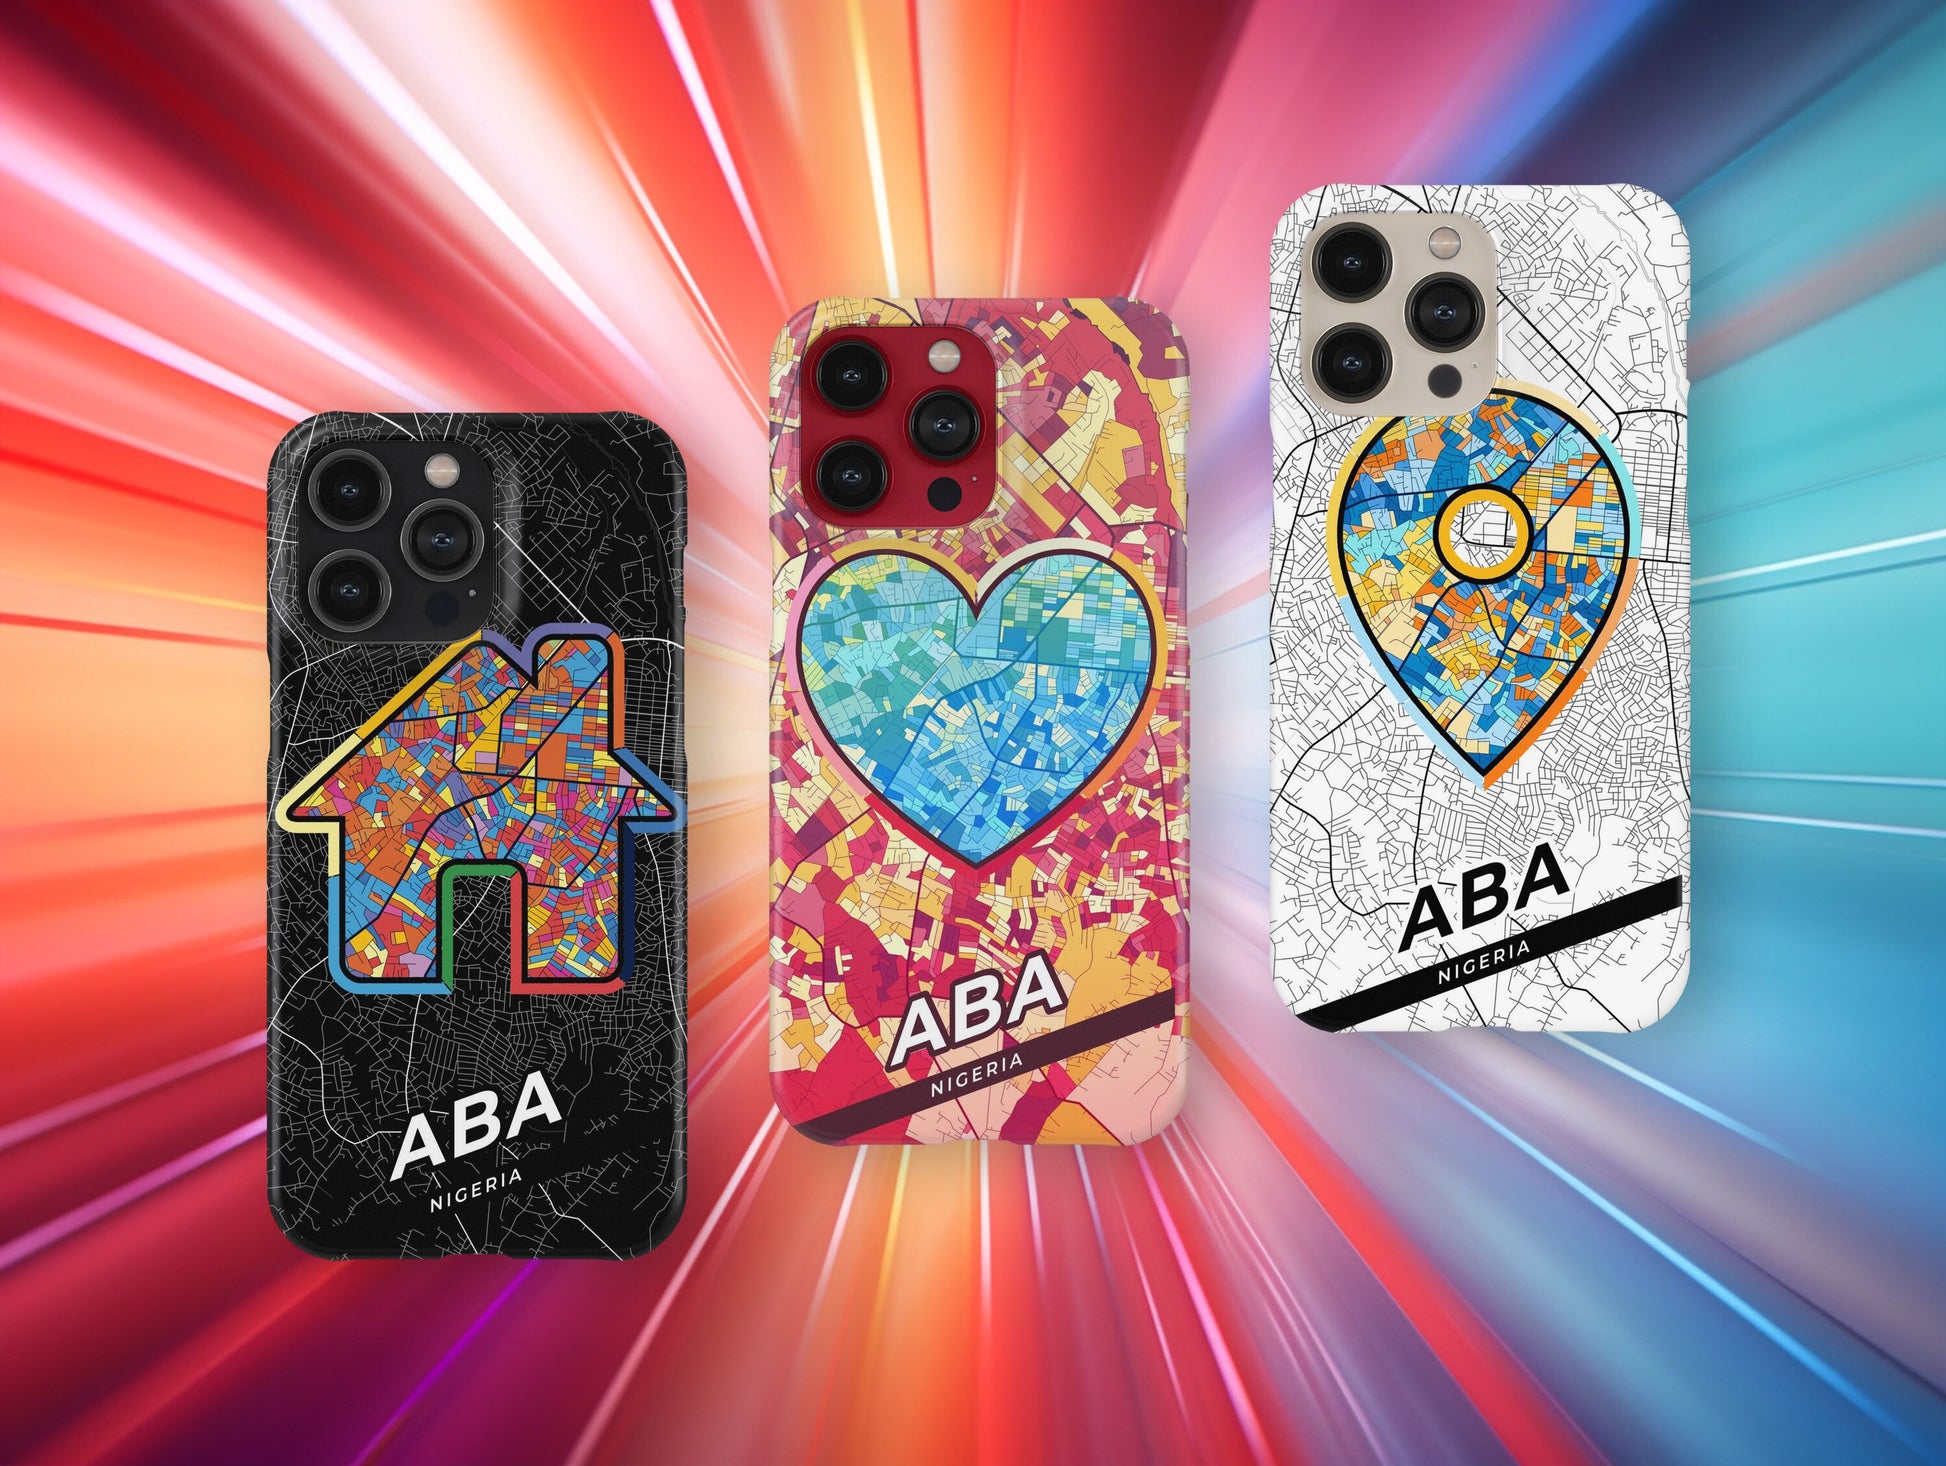 Aba Nigeria slim phone case with colorful icon. Birthday, wedding or housewarming gift. Couple match cases.